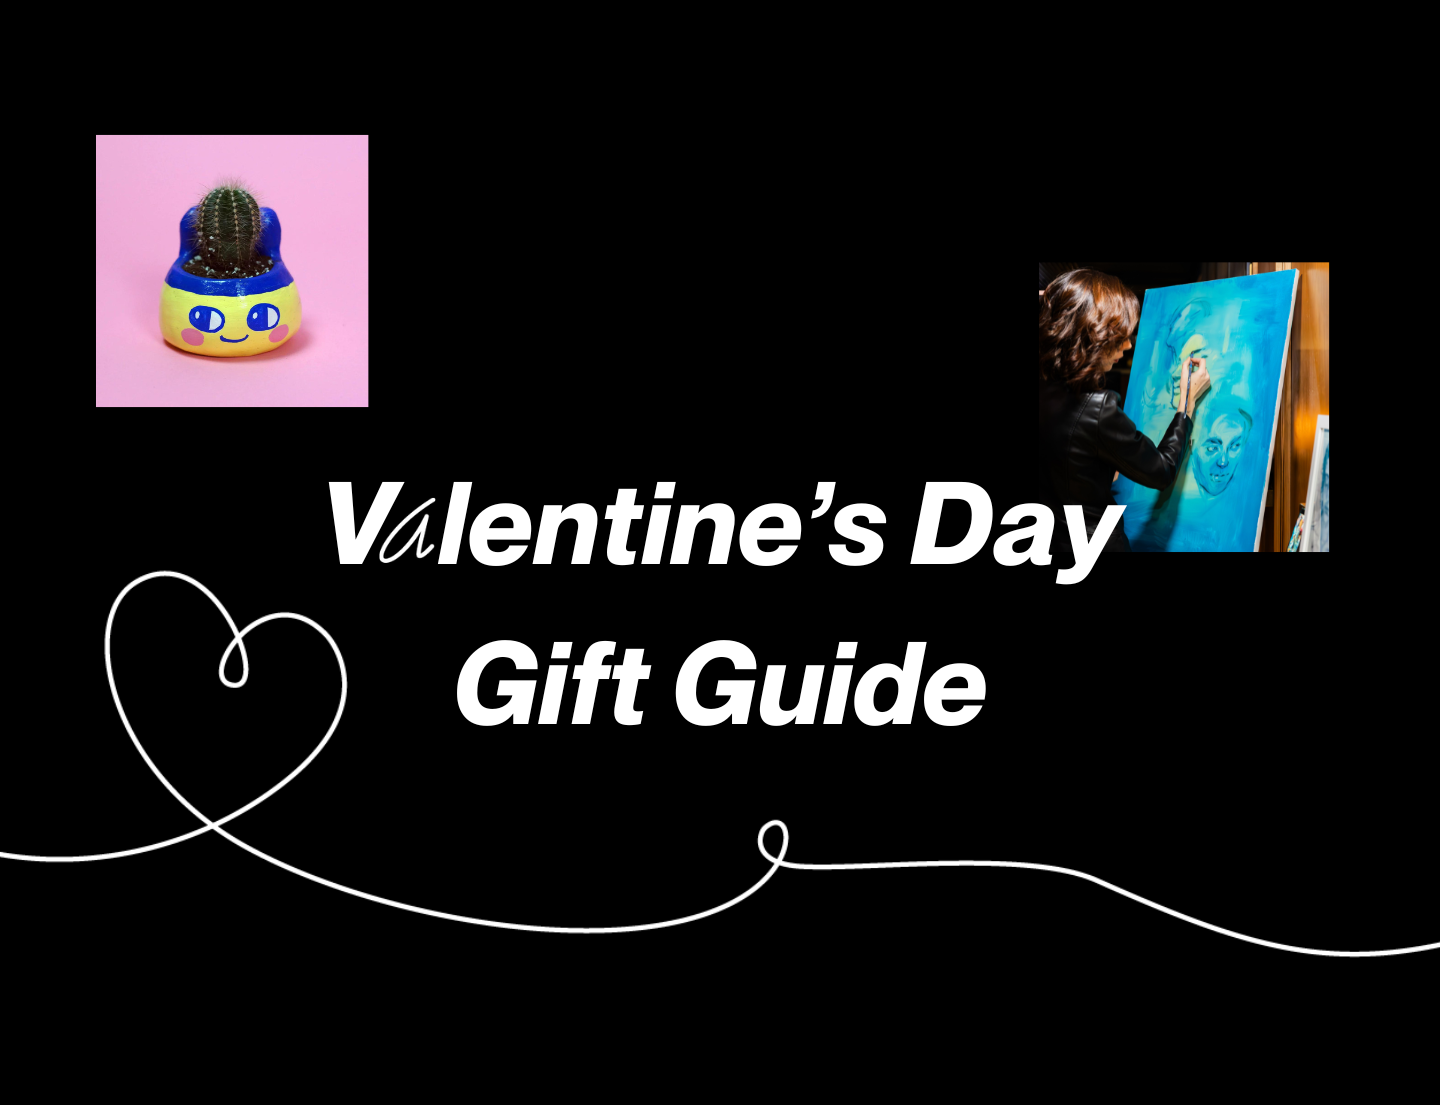 Fineline Valentine's Day Gift Guide Banner with two art features and a line drawing of a heart